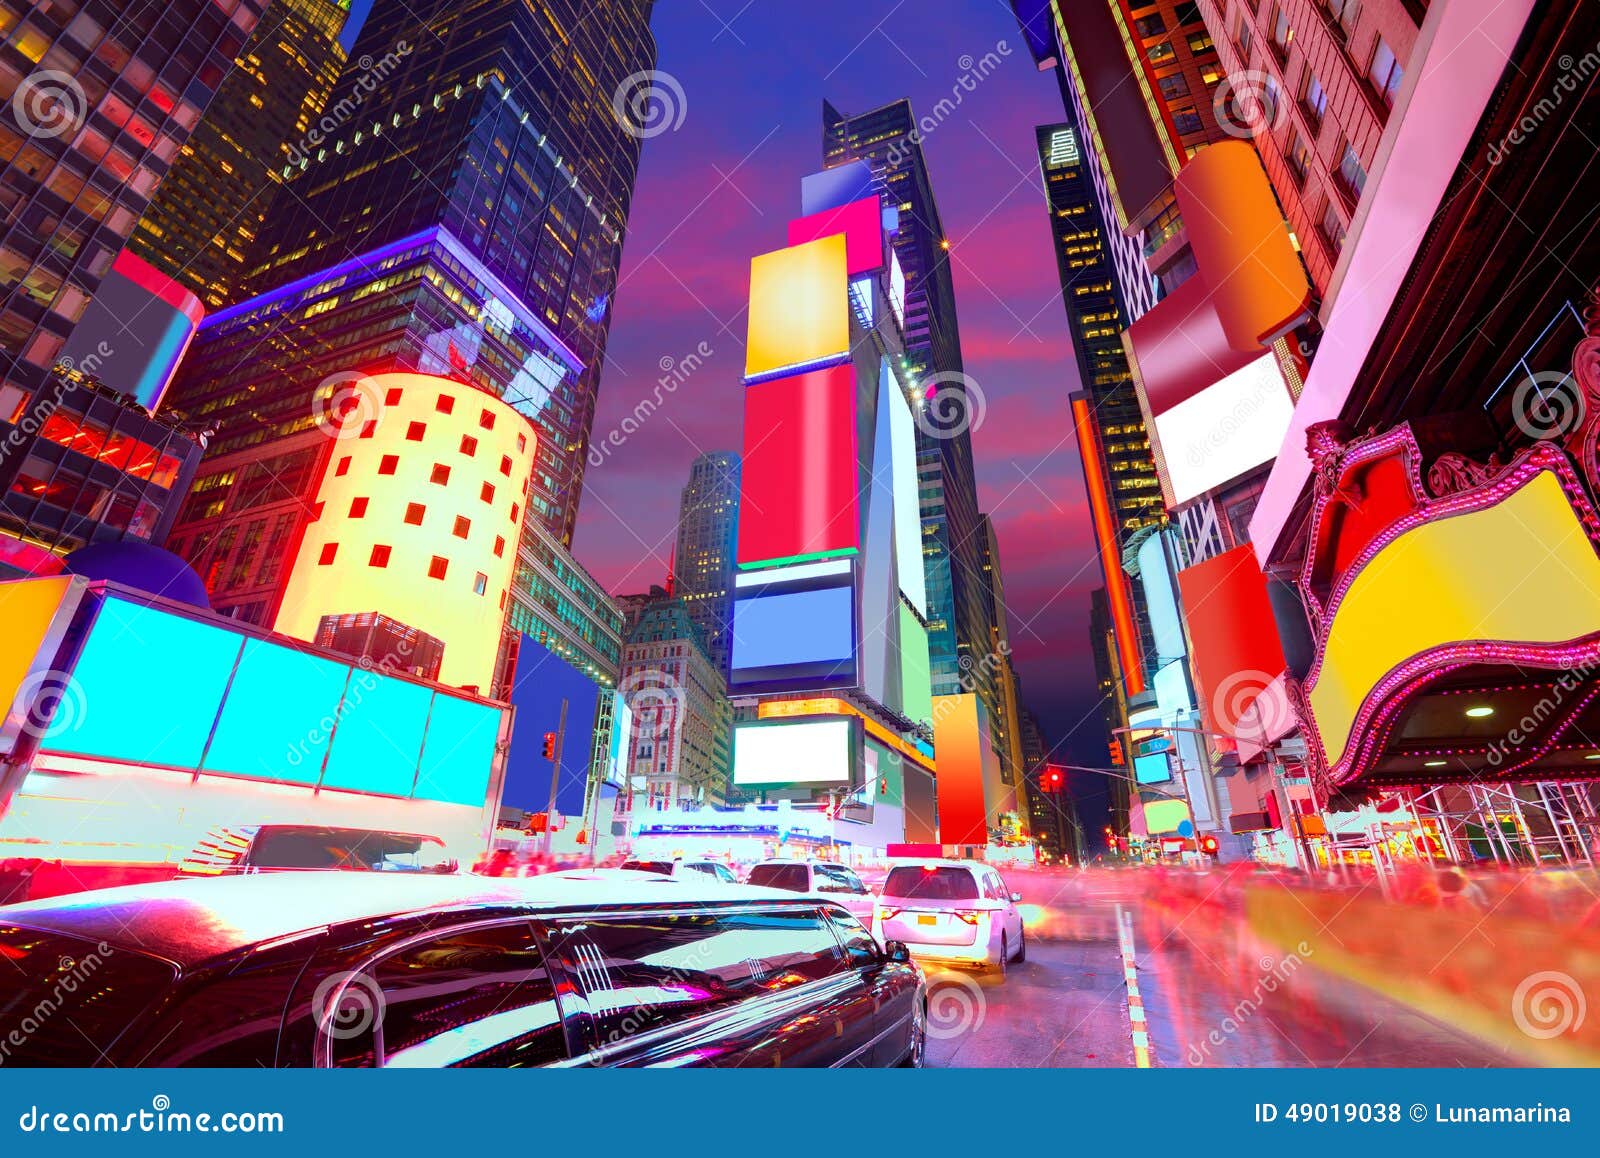 times square manhattan new york deleted ads